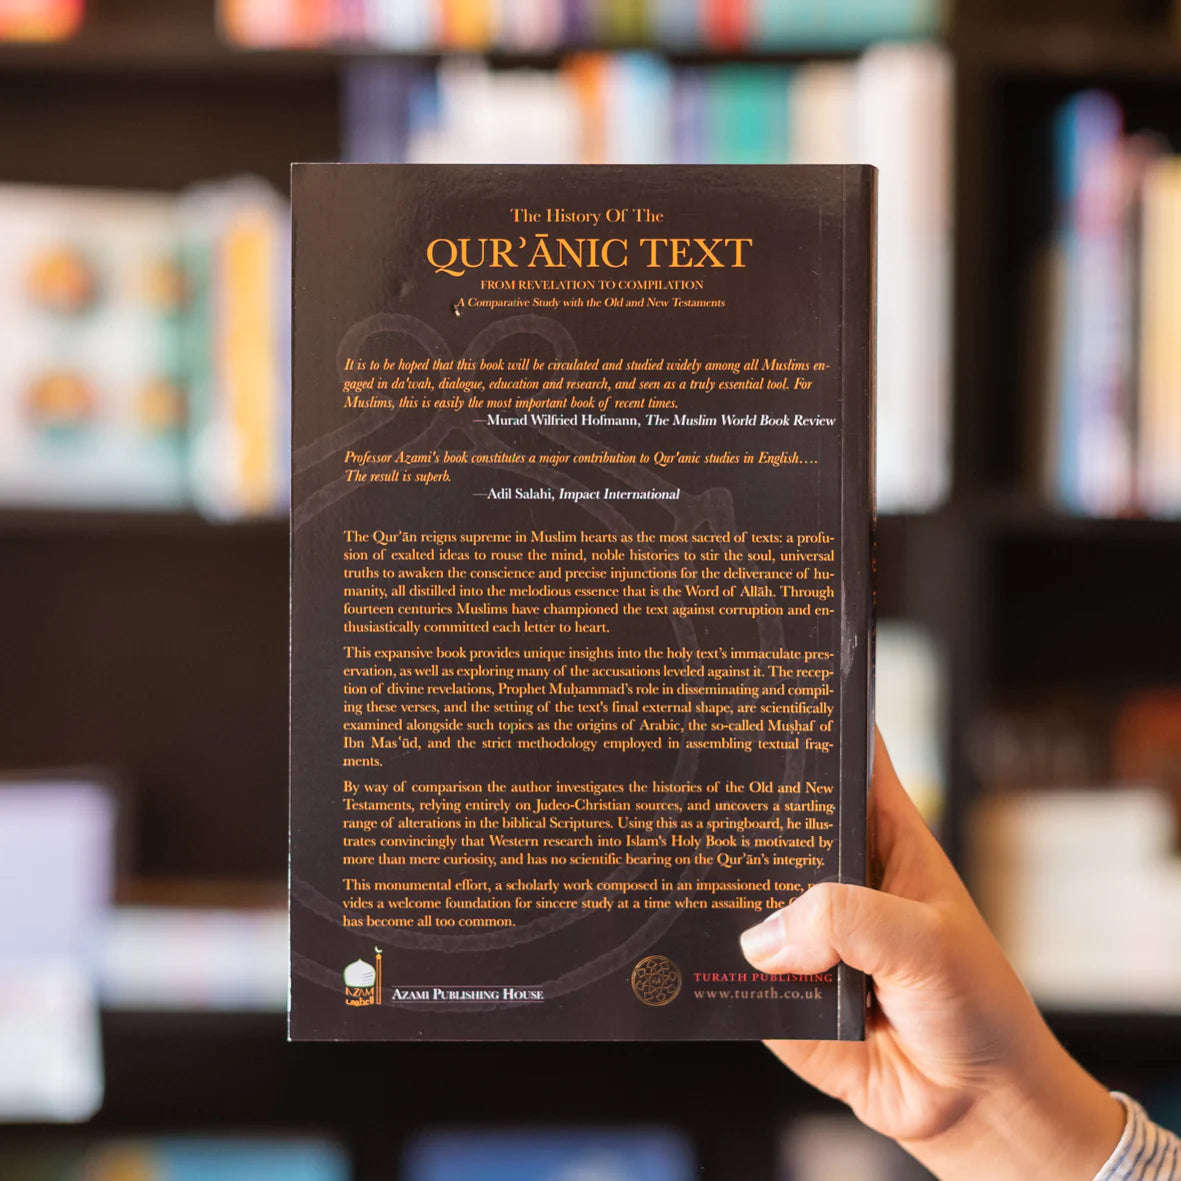 The History of The Quranic Text, from Revelation to Compilation